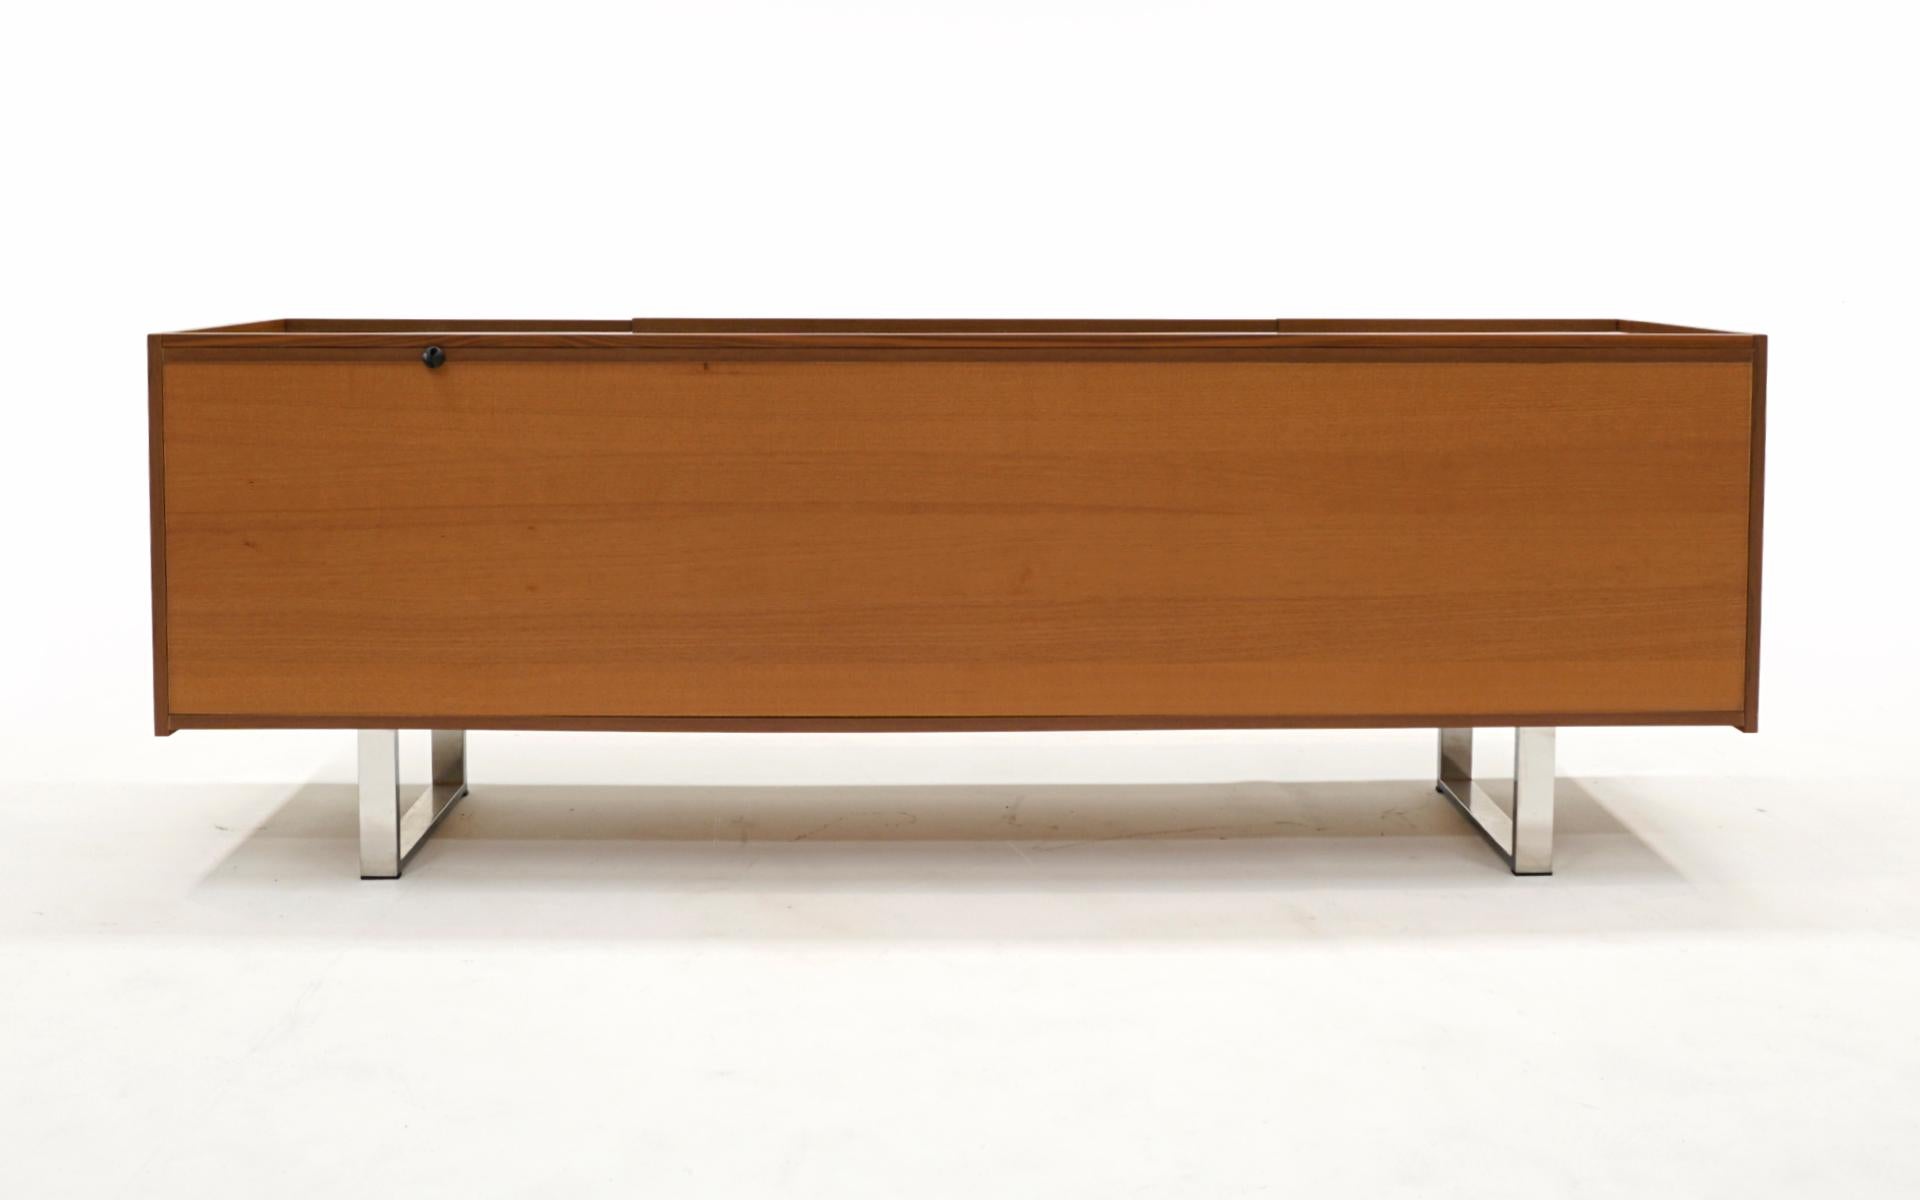 Walnut Credenza w/ Black Glass Top, Chrome Sled Base by Calligaris, Italy, 2010 For Sale 2